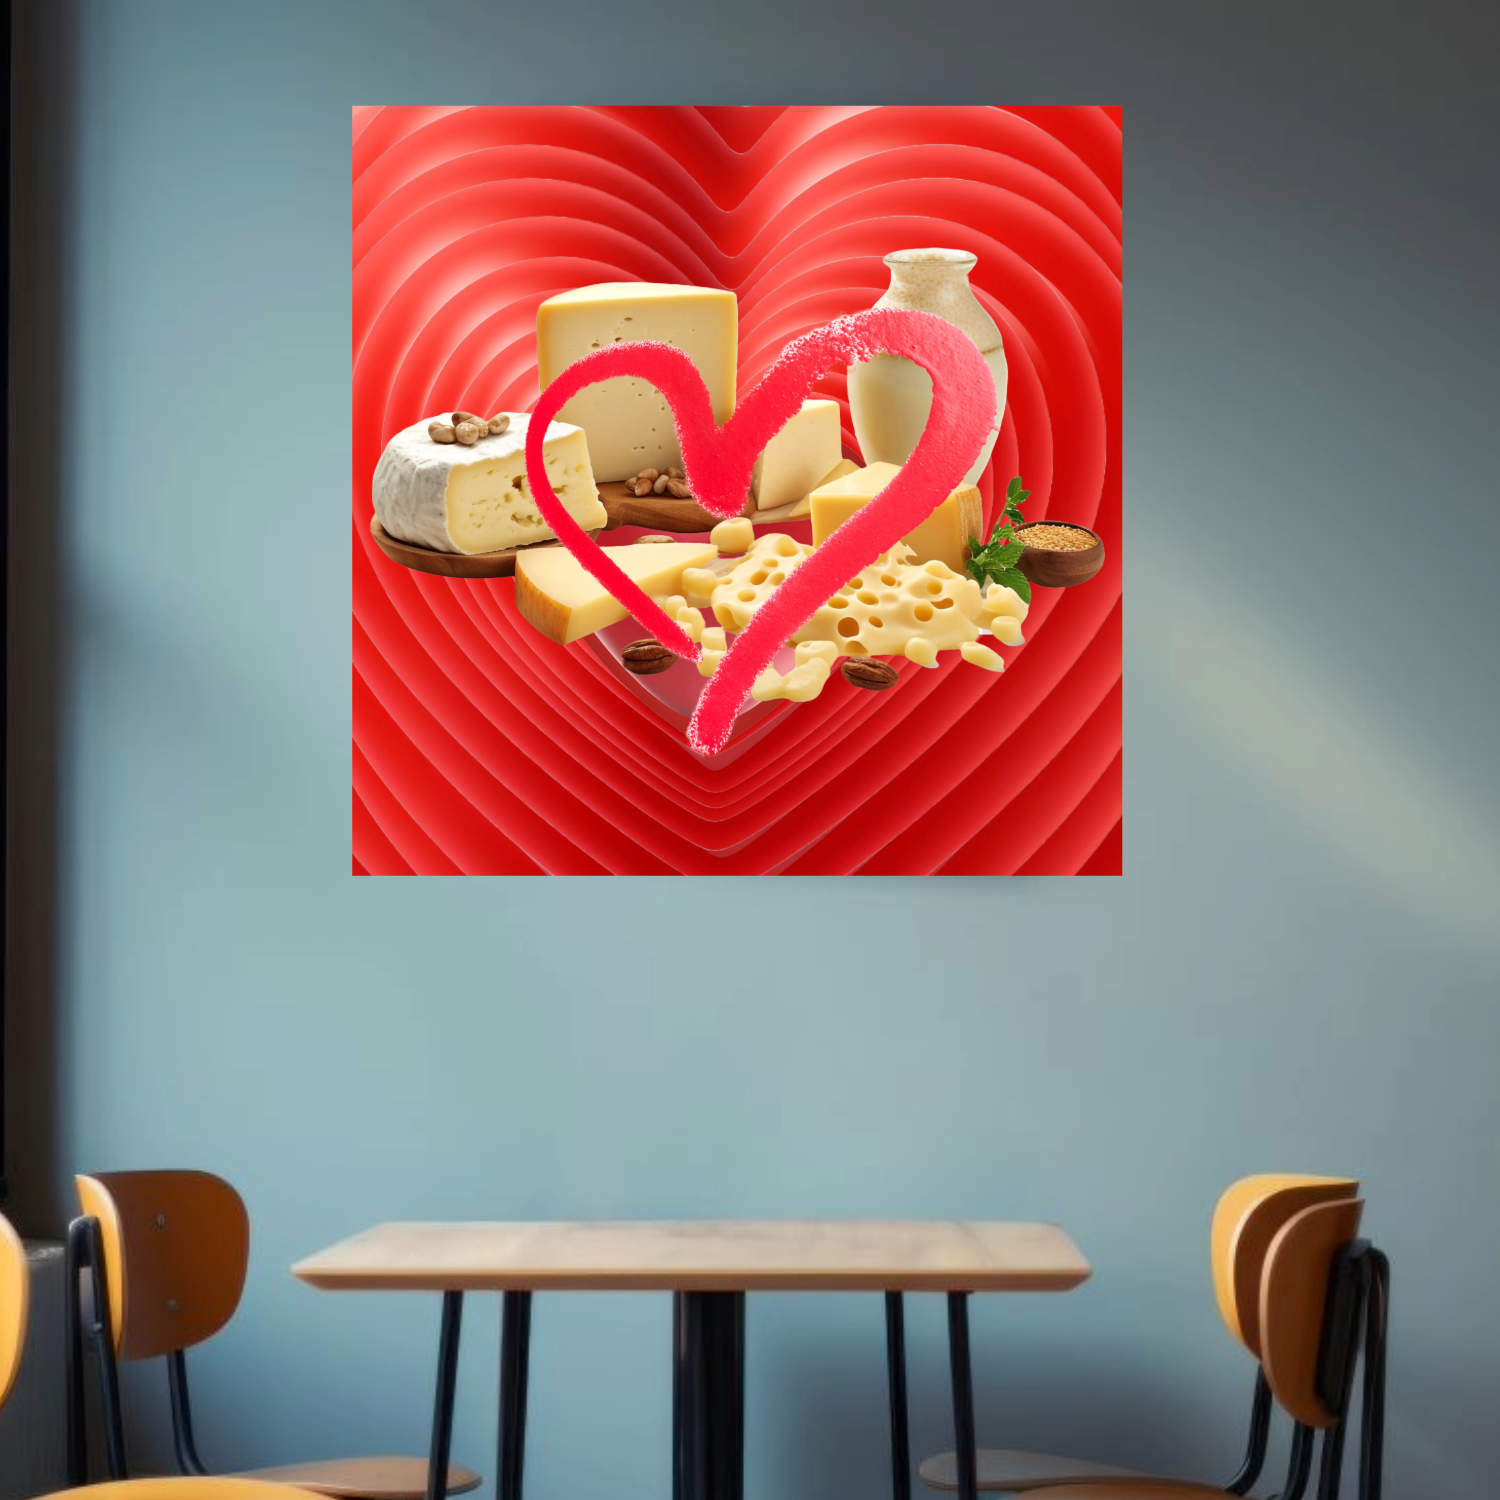 Wall Art LOVE CHEESE Canvas Print Painting Original Giclee 32X32 GW Nice Beauty Fun Design Fit Red Hot House Home Living Office Gift Ready to Hang